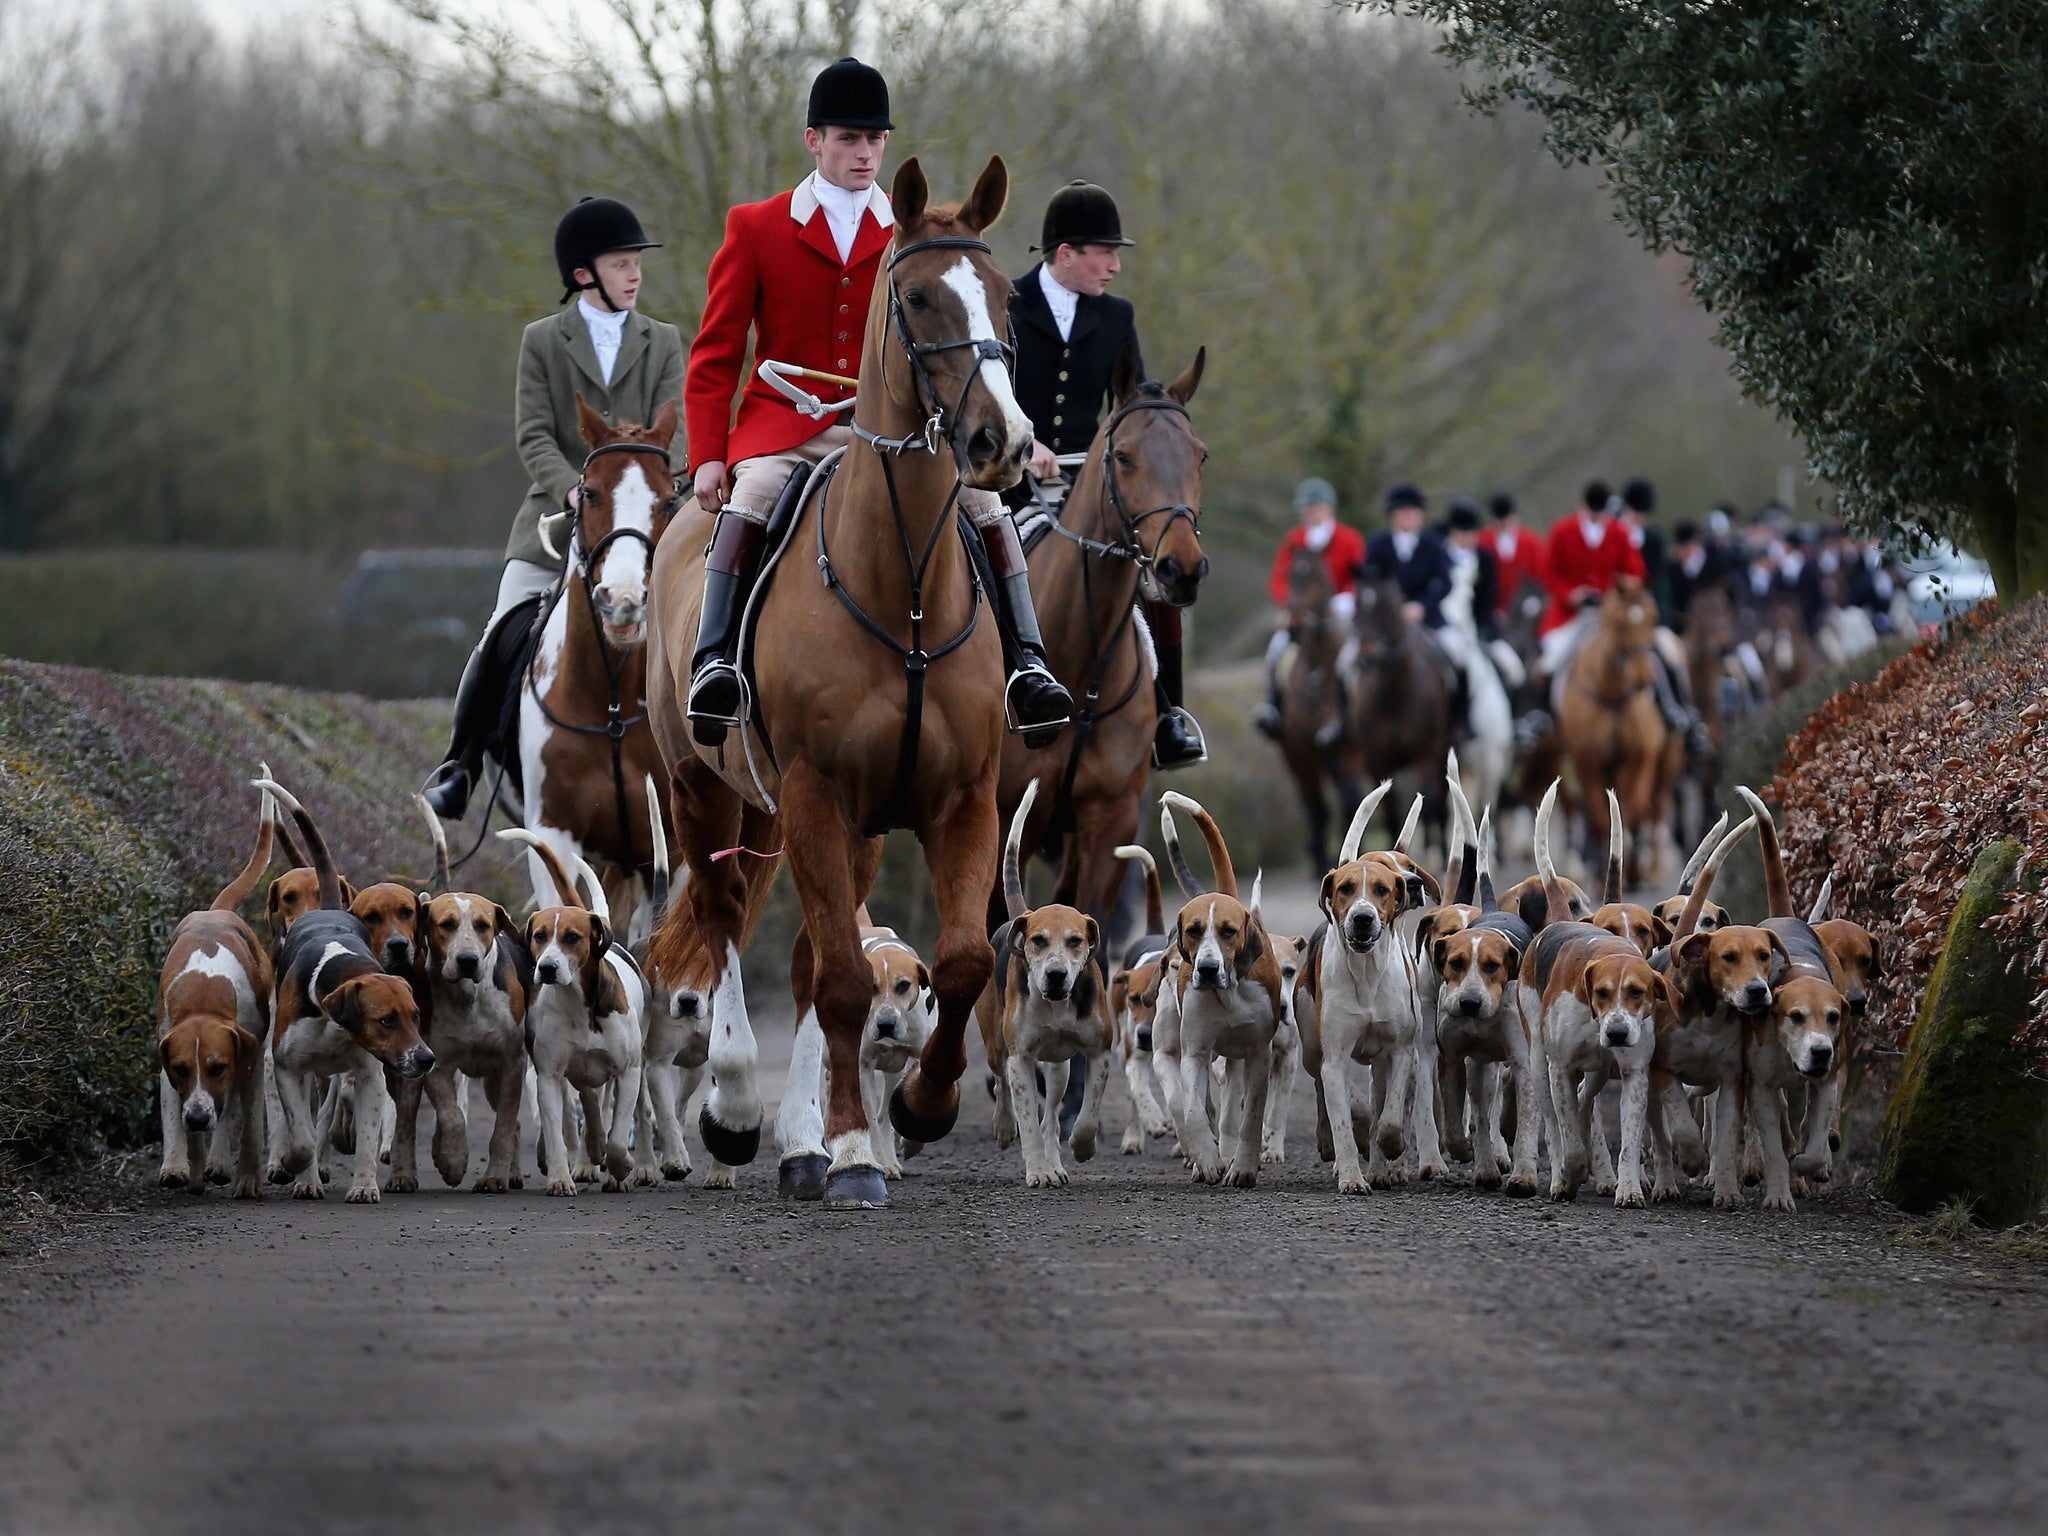 Fox hunting has been banned in England and Wales since 2004